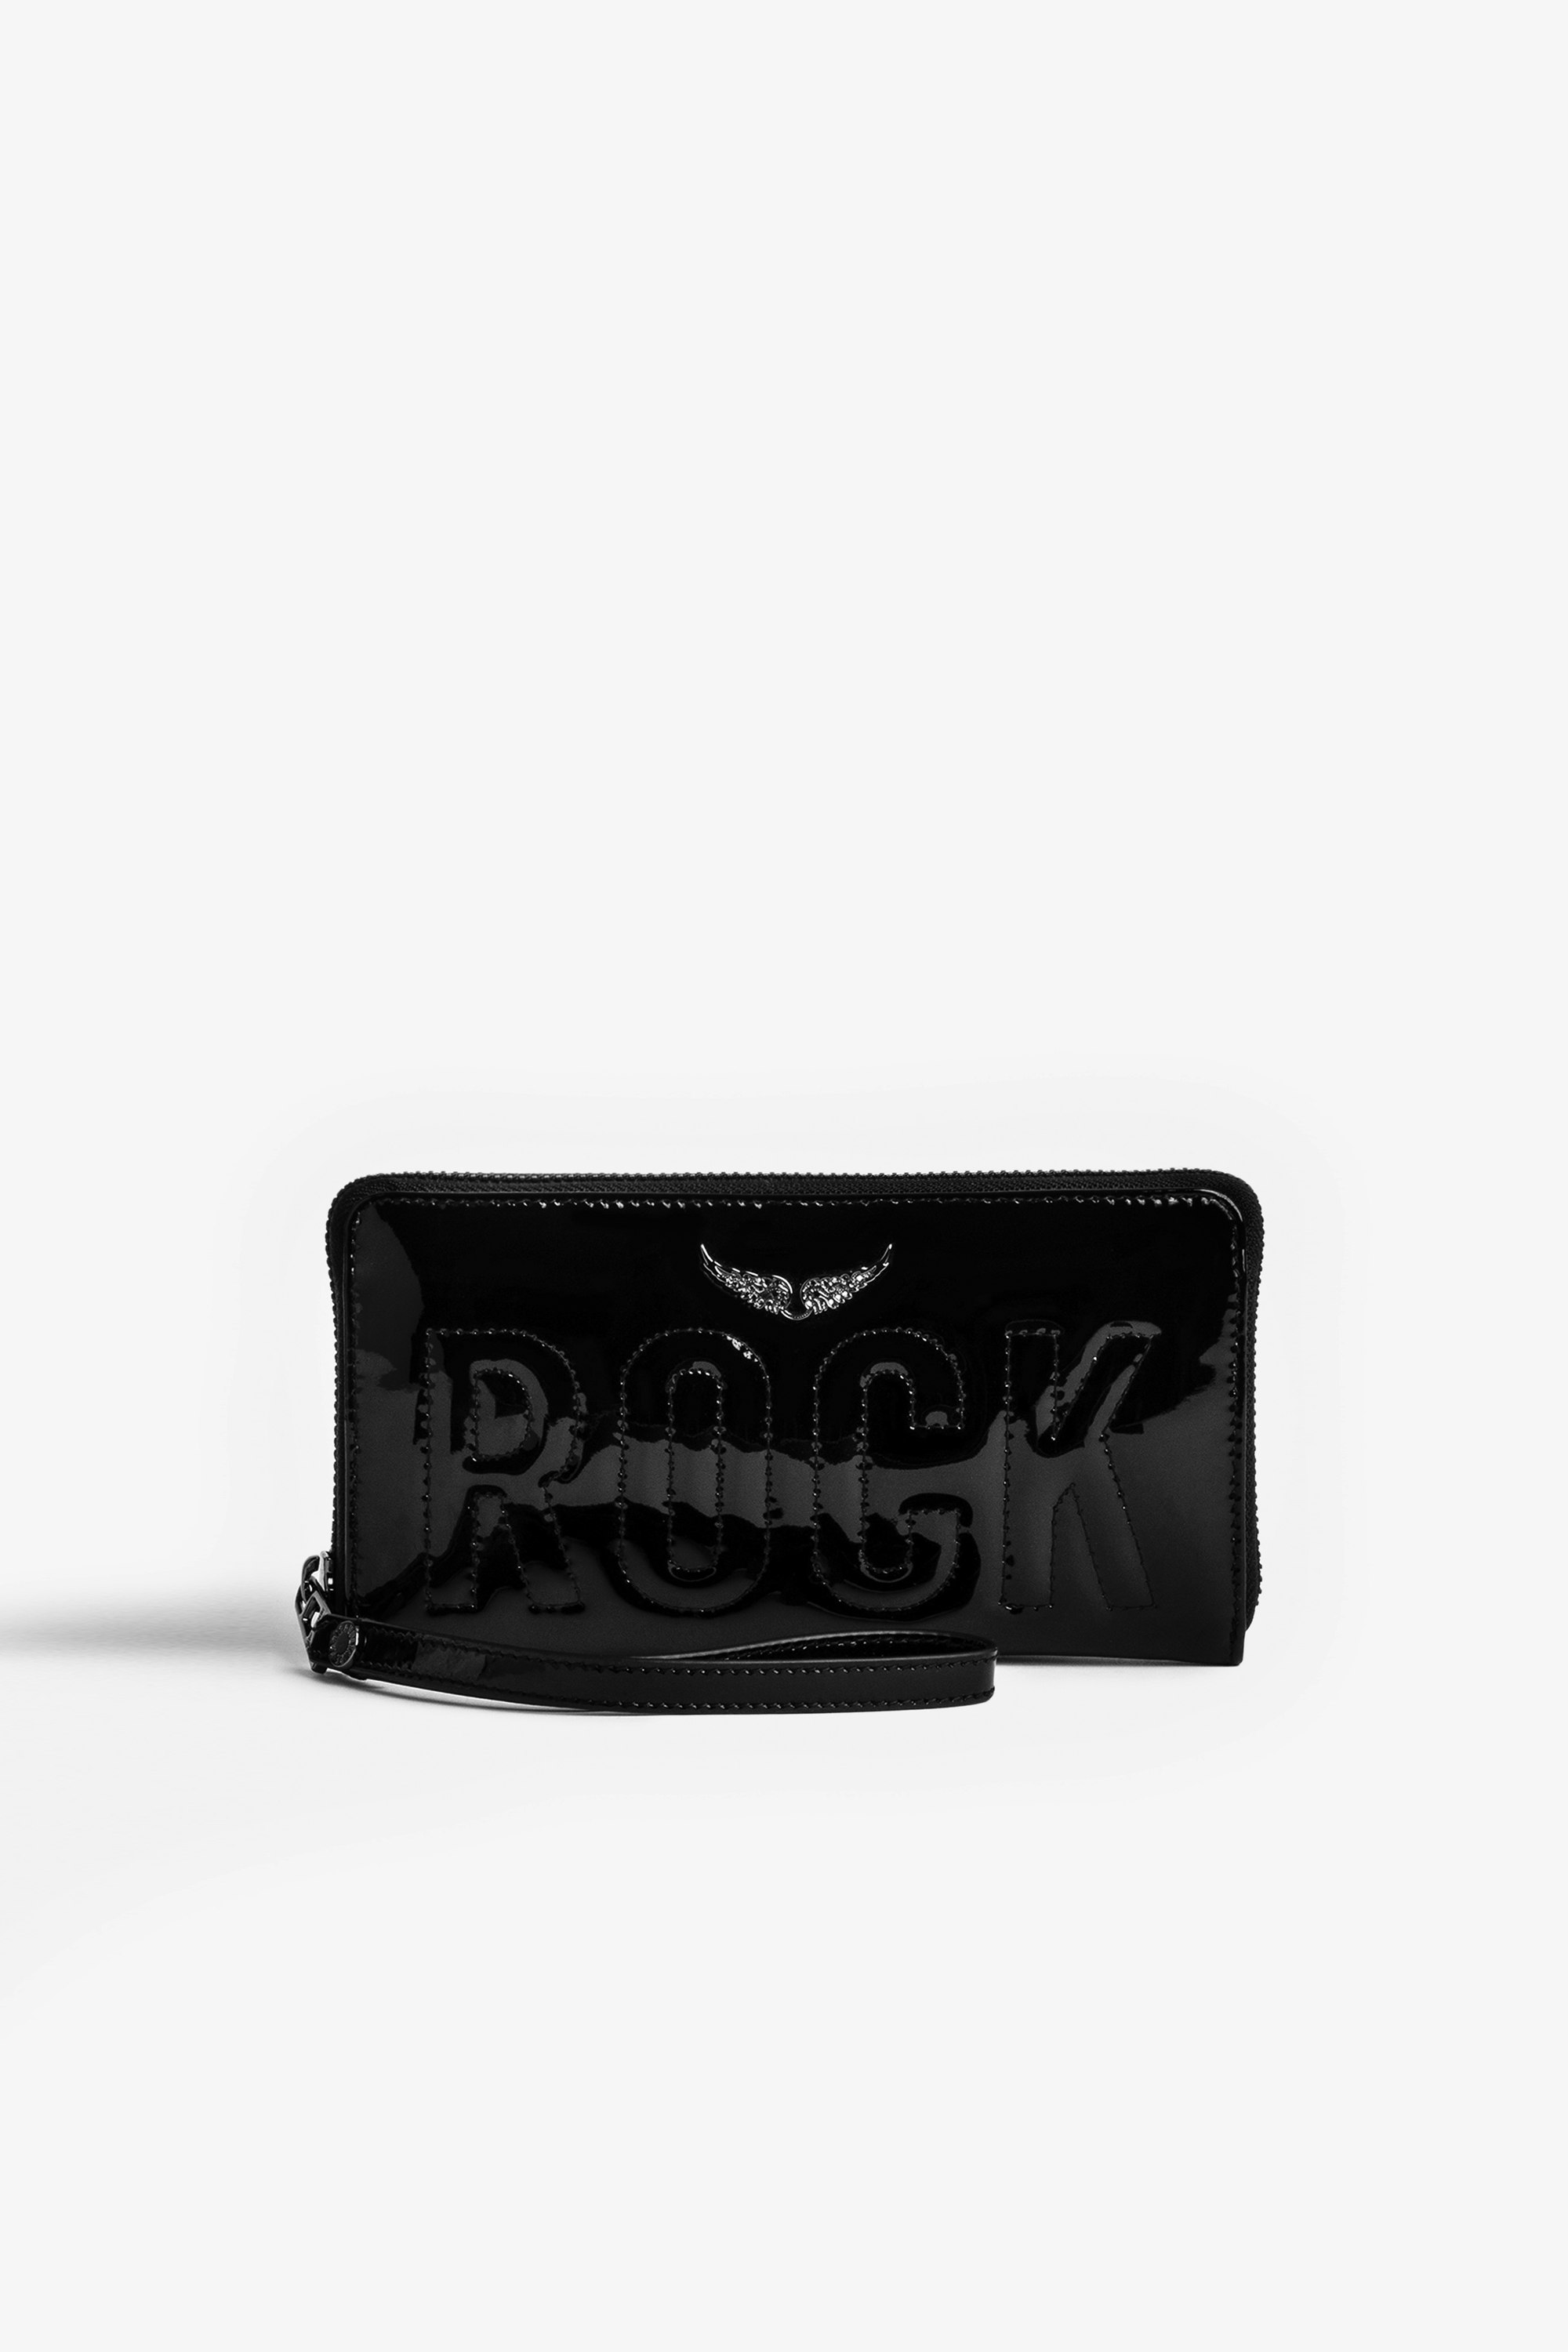 Compagnon Wallet Women’s black patent leather Compagnon wallet with topstitched “Rock” slogan and crystal-embellished wings charm